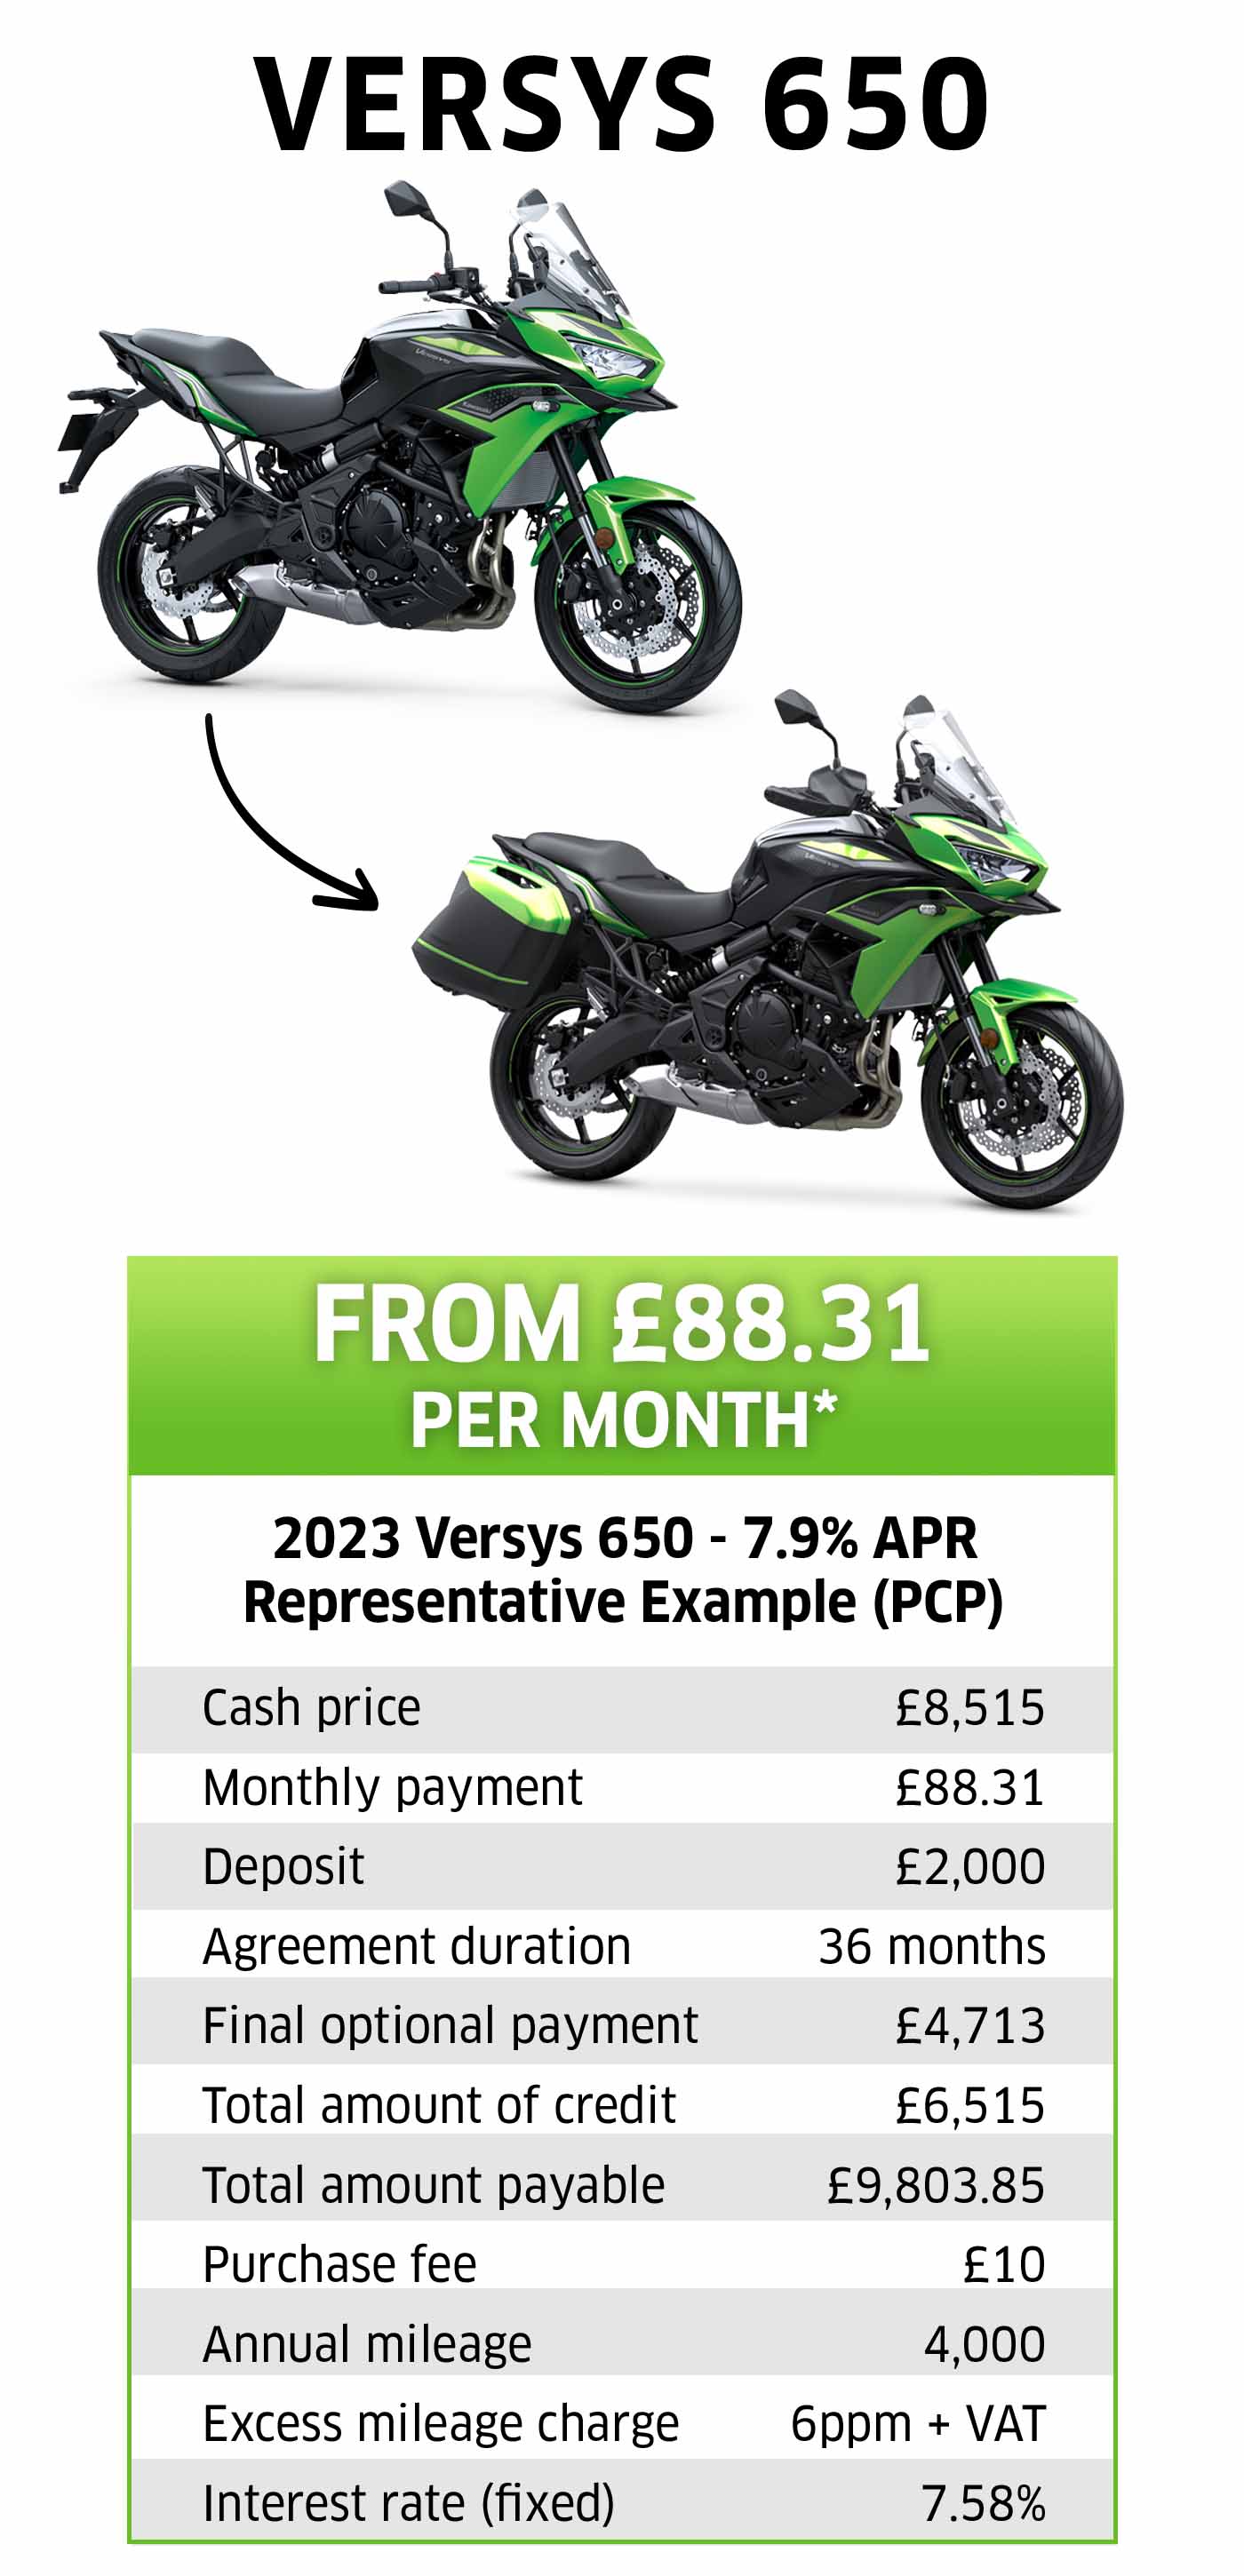 Kawasaki Versys 650: Enjoy a Free Tourer Upgrade worth £1,150 when you purchase a new 2022 or 2023 model with K-Options 9.9% APR representative finance.